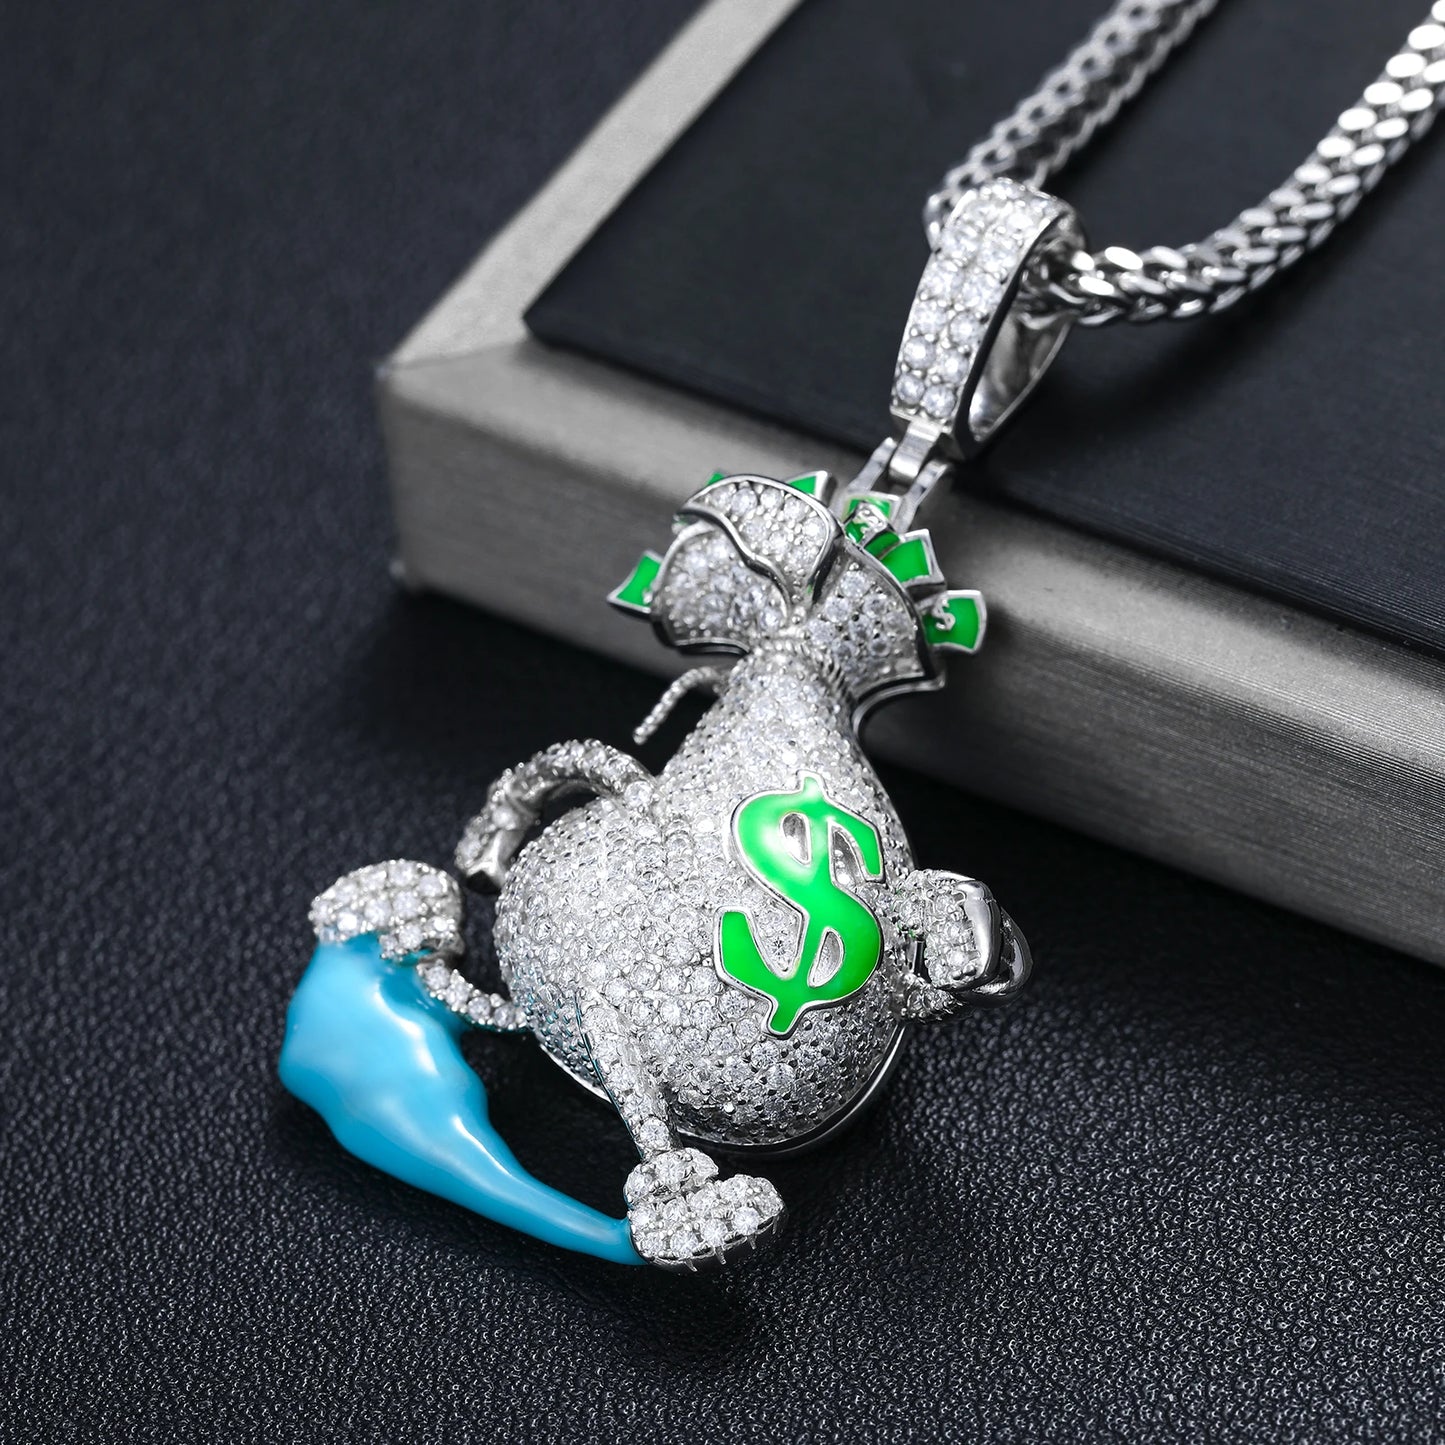 S925 Silver Fashion Personality Glowing Escape Dollar Money Bag Pendant Necklaces D Color VVS Creativity Hip Hop Jewelry Gifts